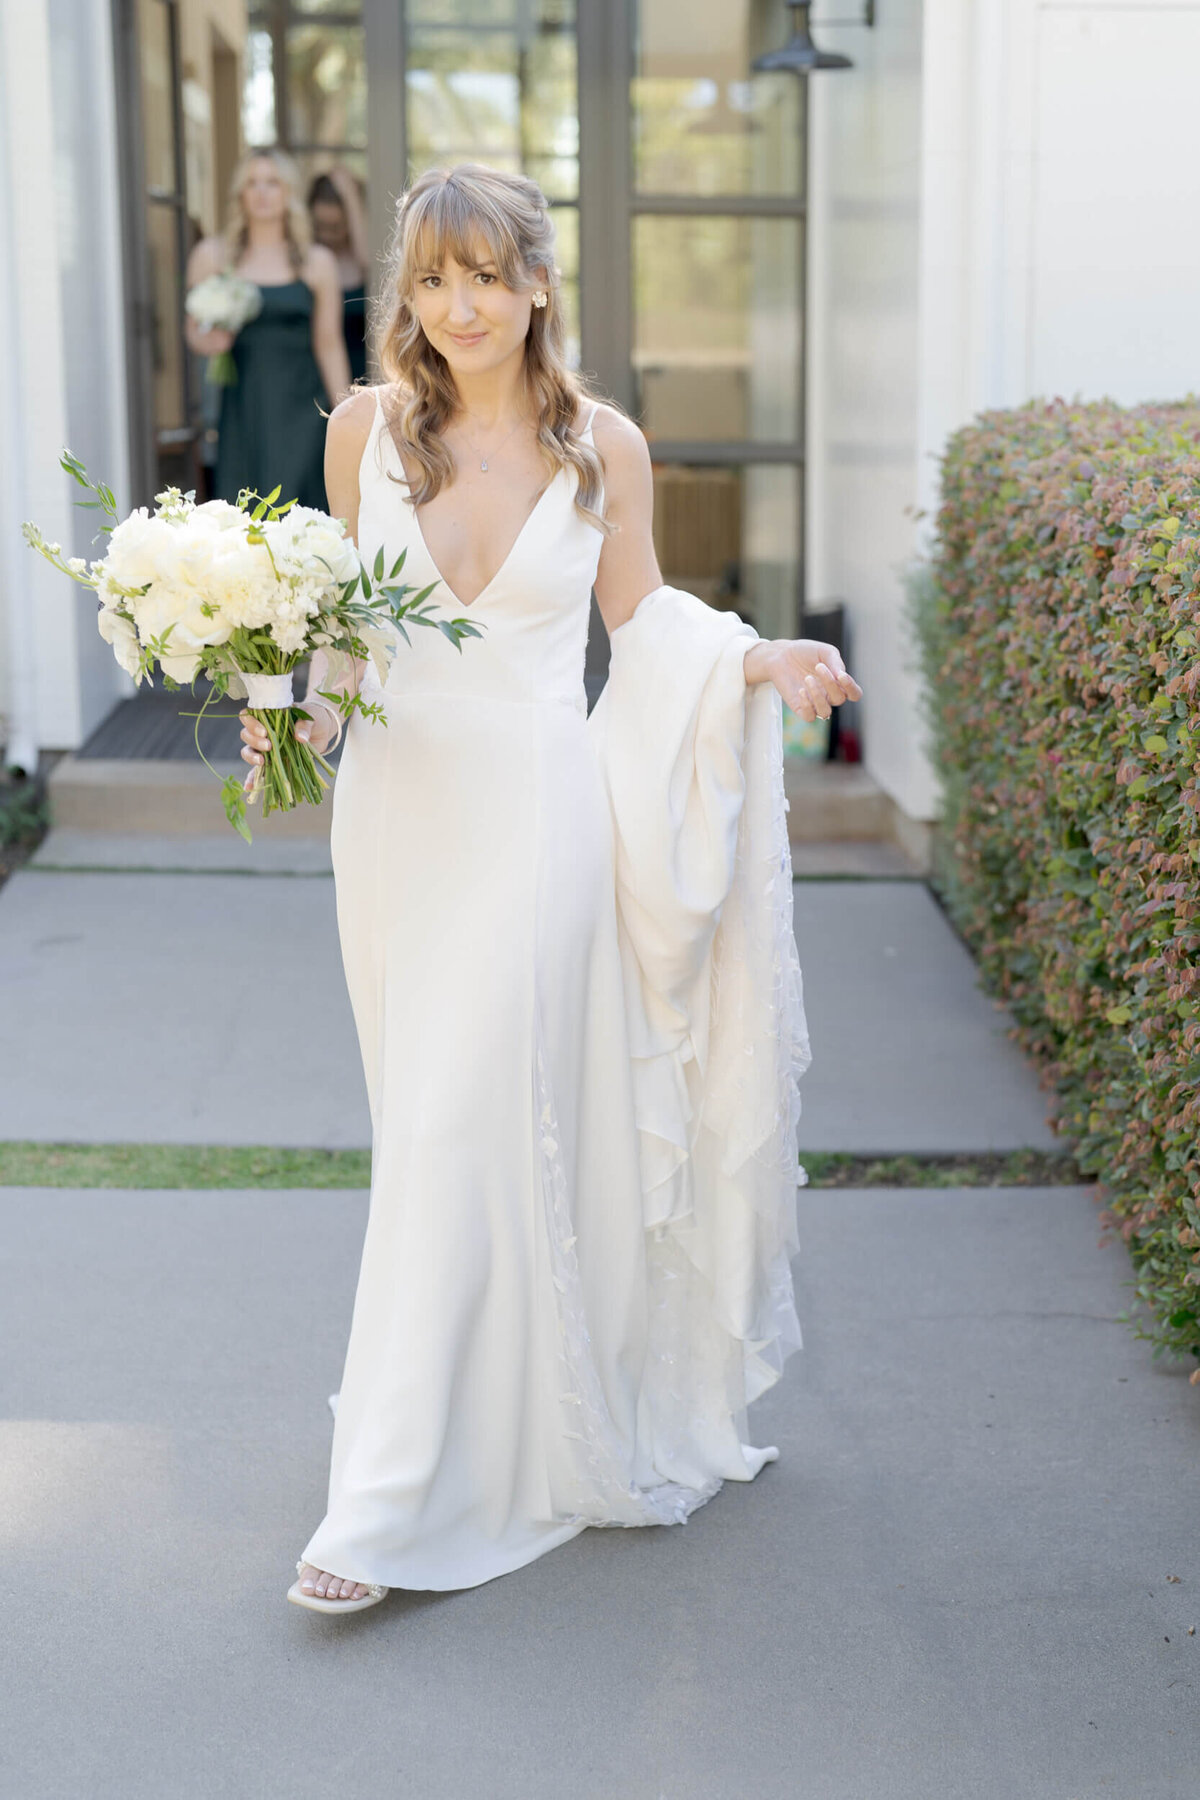 Sonoma County wedding photographer captures a bride holding a bouquet and a long train of her white gown.